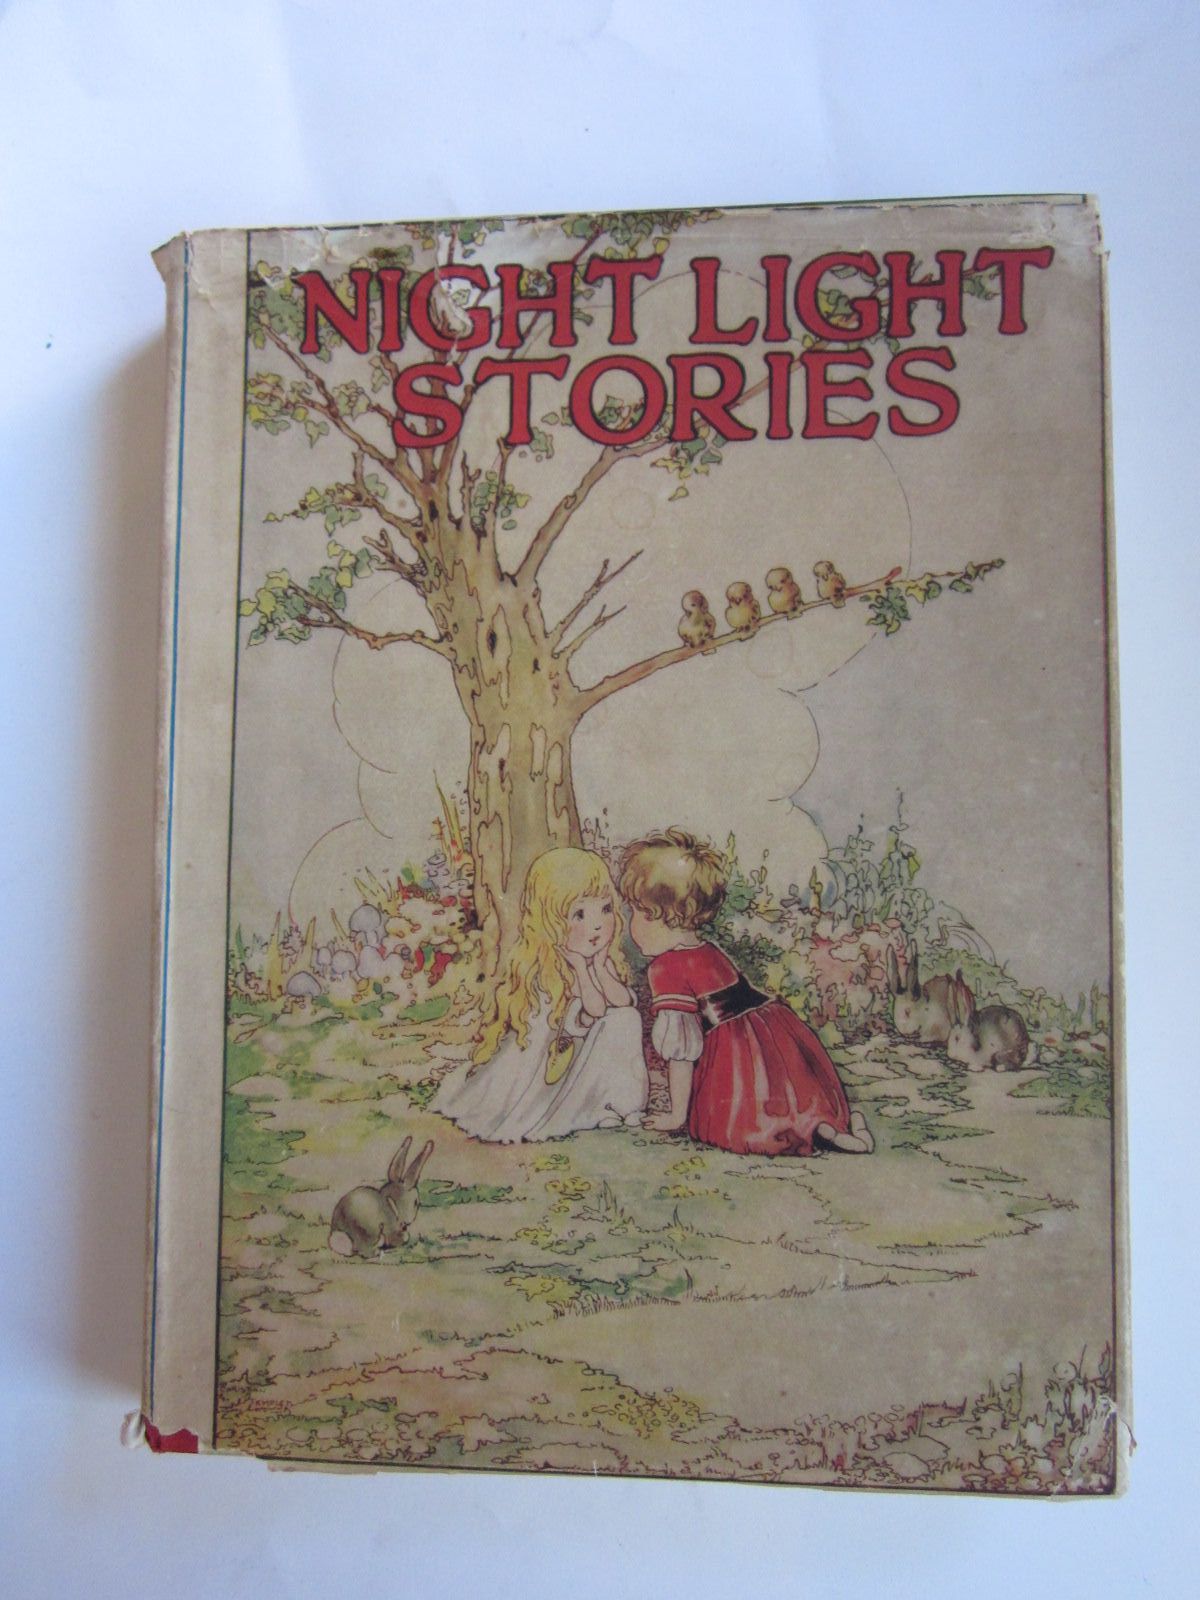 Cover of NIGHT LIGHT STORIES by Sibyl B. Owsley